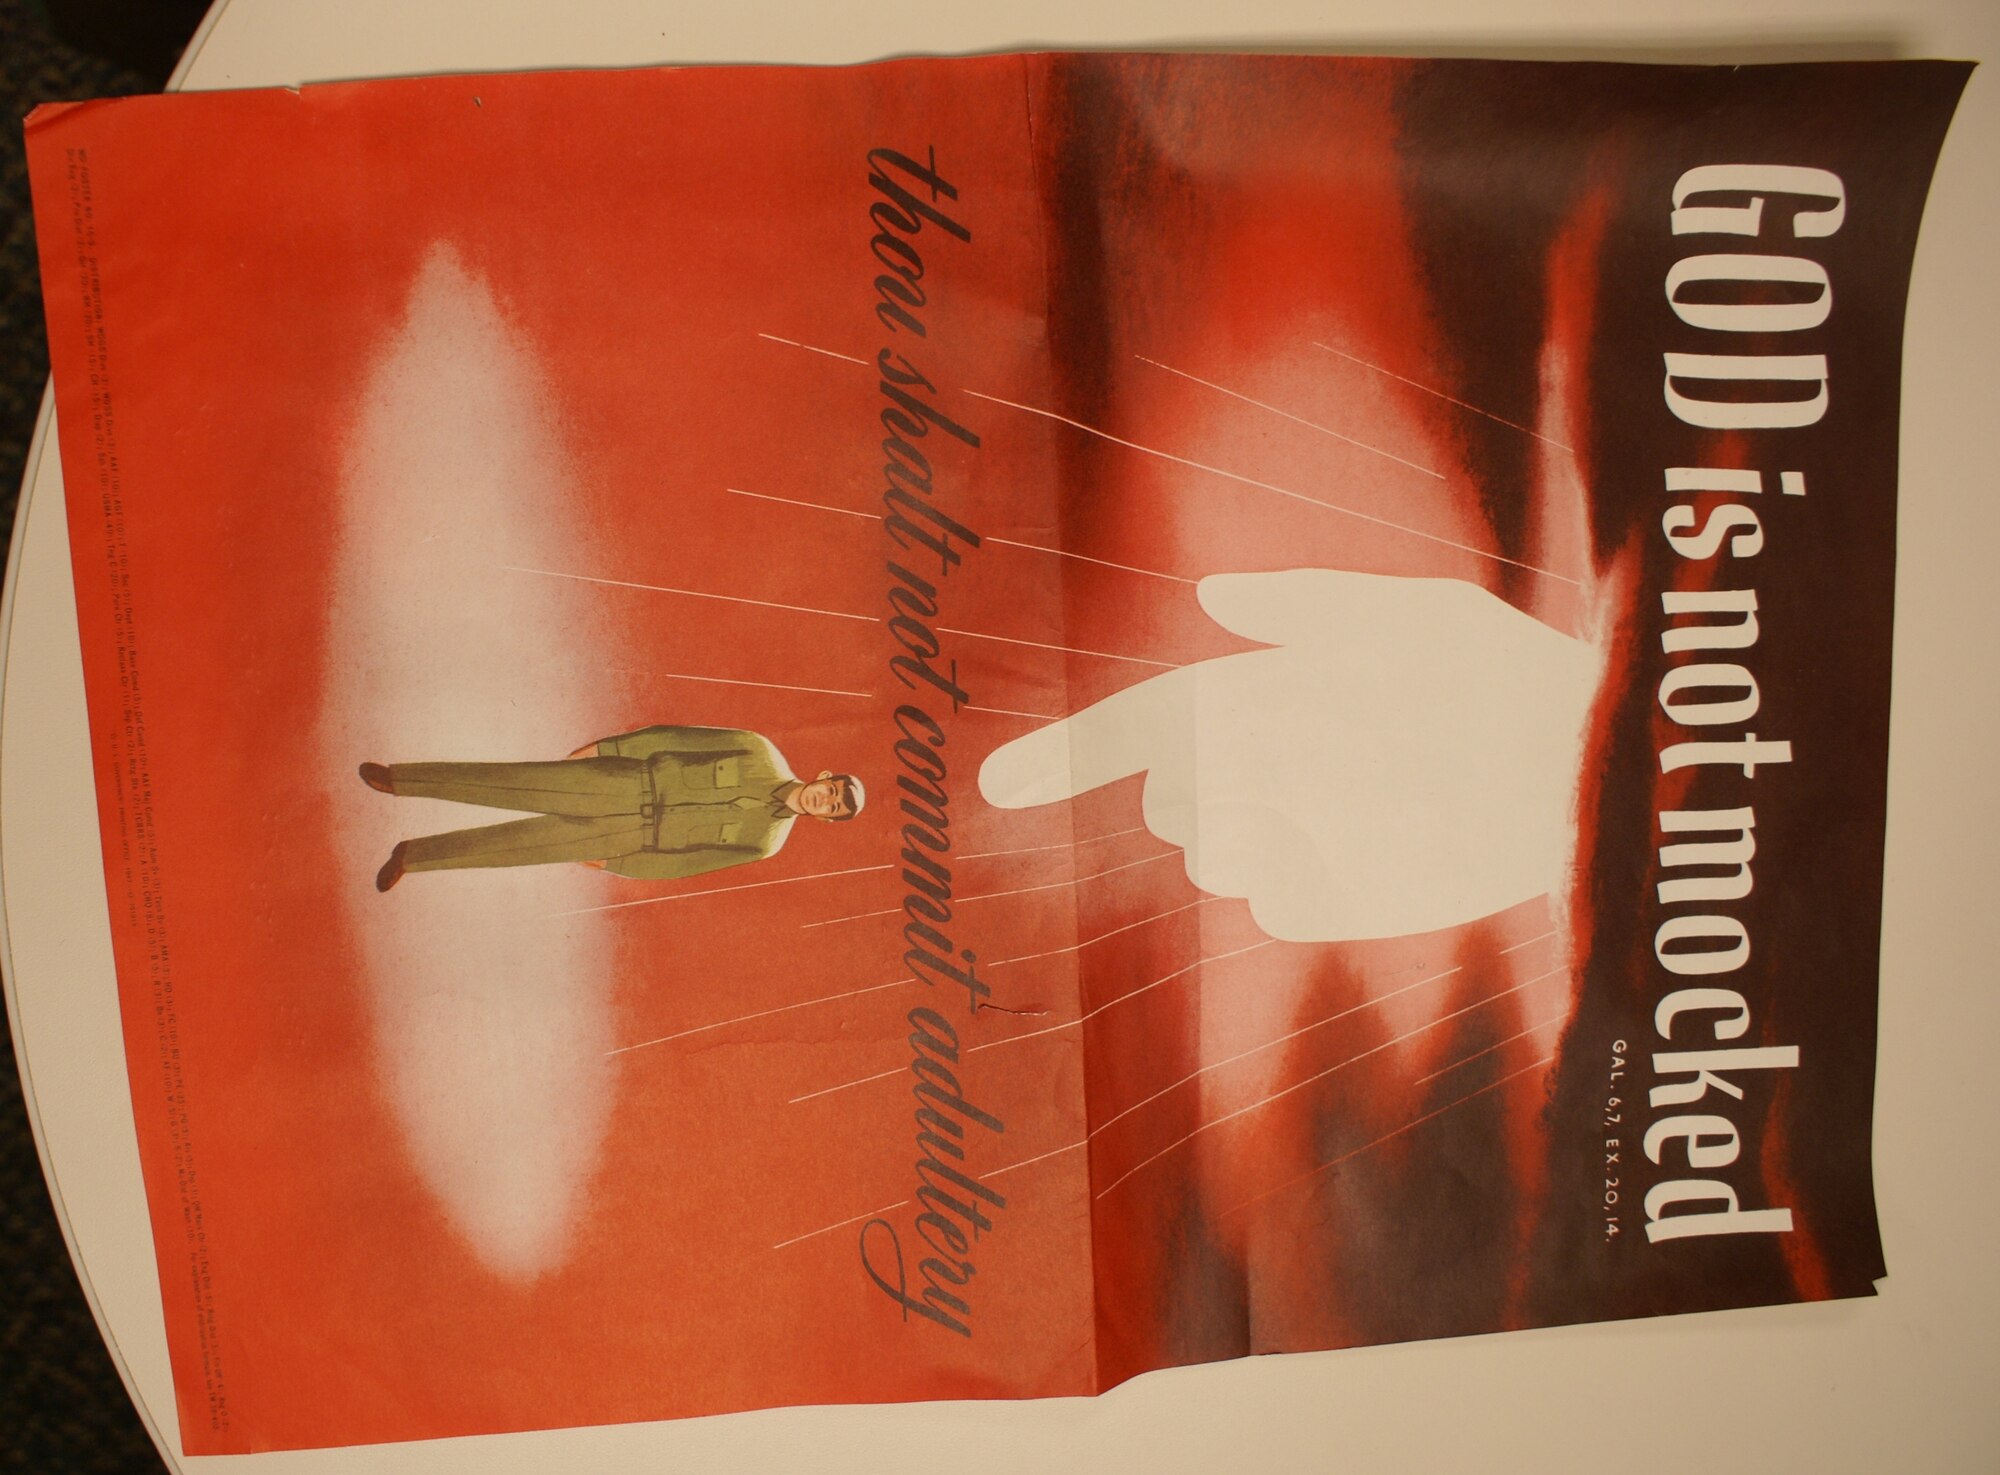 Documents recently discovered under the McChord Chapel include this poster, which warned servicemembers in 1947 that there were potentially harsher consequences of adultery than merely receiving an Article 15. (U.S. Air Force photo/Staff Sgt. Eric Burks)